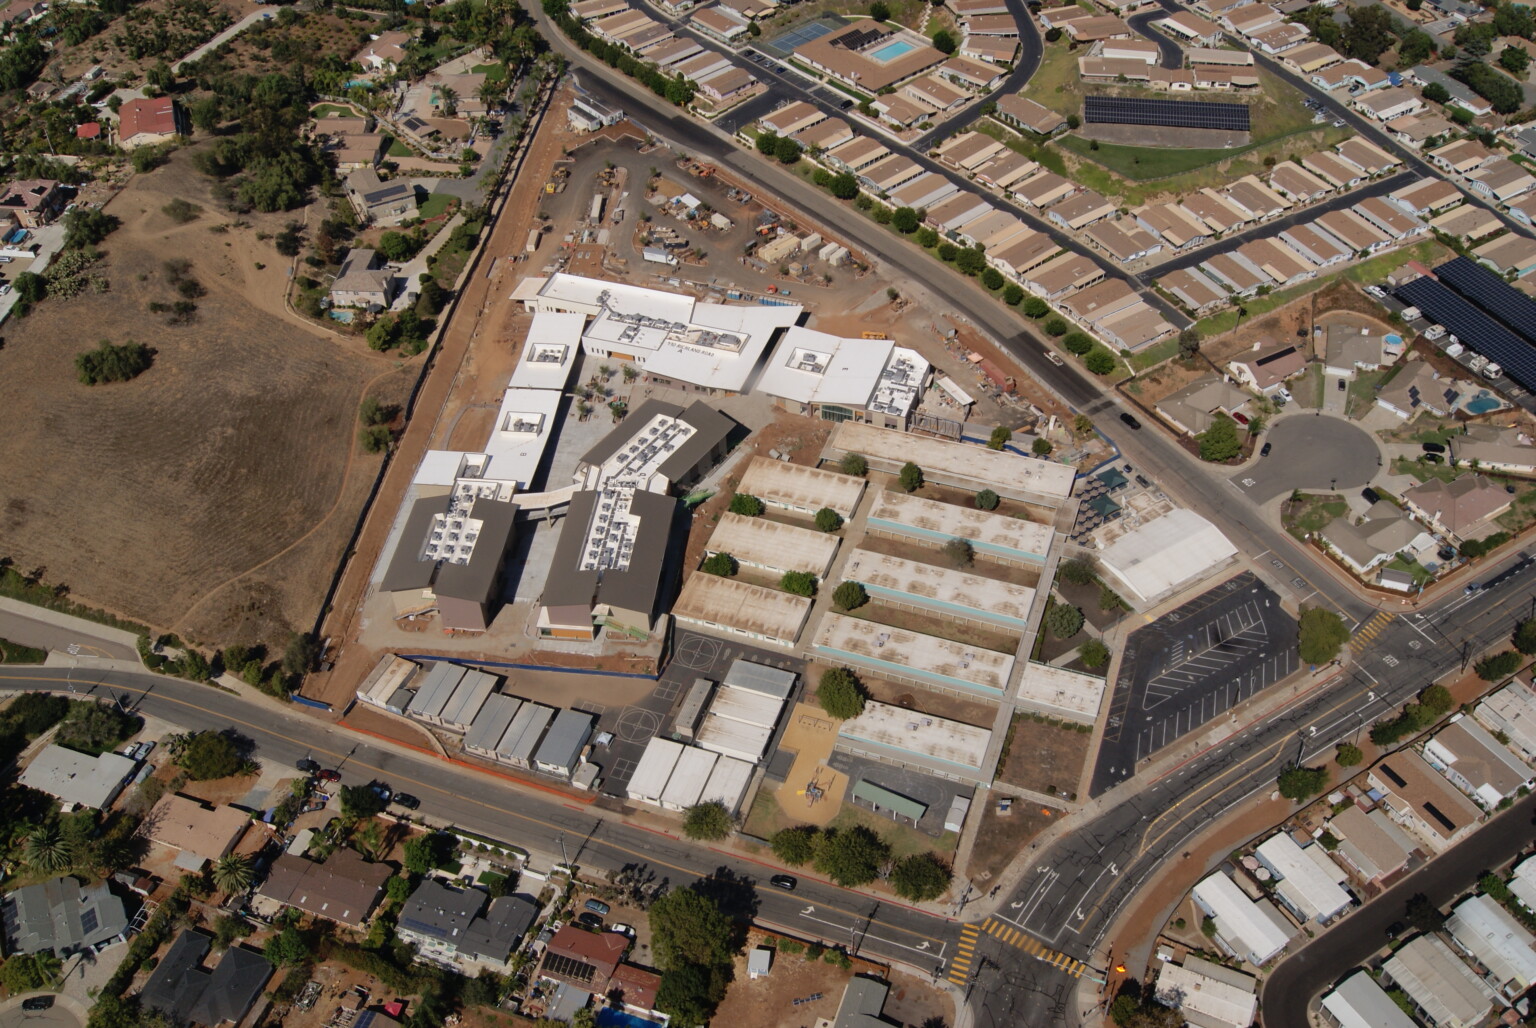 Aerial view of Richland Elementary School campus site under construction